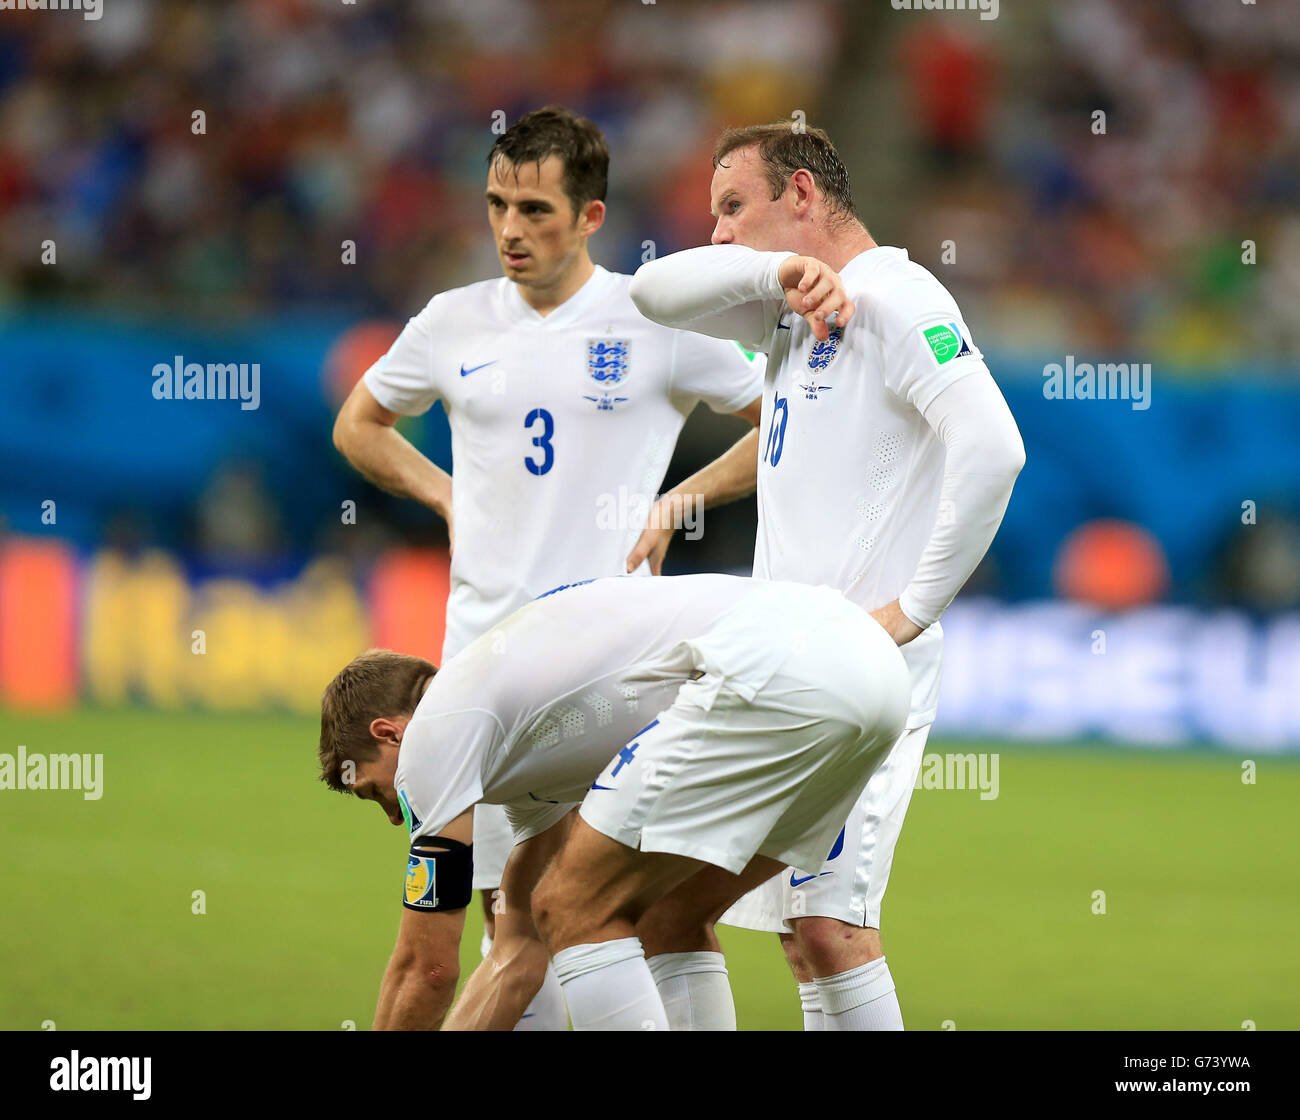 England's Leighton Baines and England's Wayne Rooney stand nearby as England's Steven Gerrard places the ball for a free kick during the FIFA World Cup, Group D match at the Arena da Amazonia, Manaus, Brazil. PRESS ASSOCIATION Photo. Picture date: Saturday June 14, 2014. See PA story SOCCER England. Photo credit should read: Mike Egerton/PA Wire. Editorial use only. No commercial use. No use with any unofficial 3rd party logos. No manipulation of images. No video emulation Stock Photo